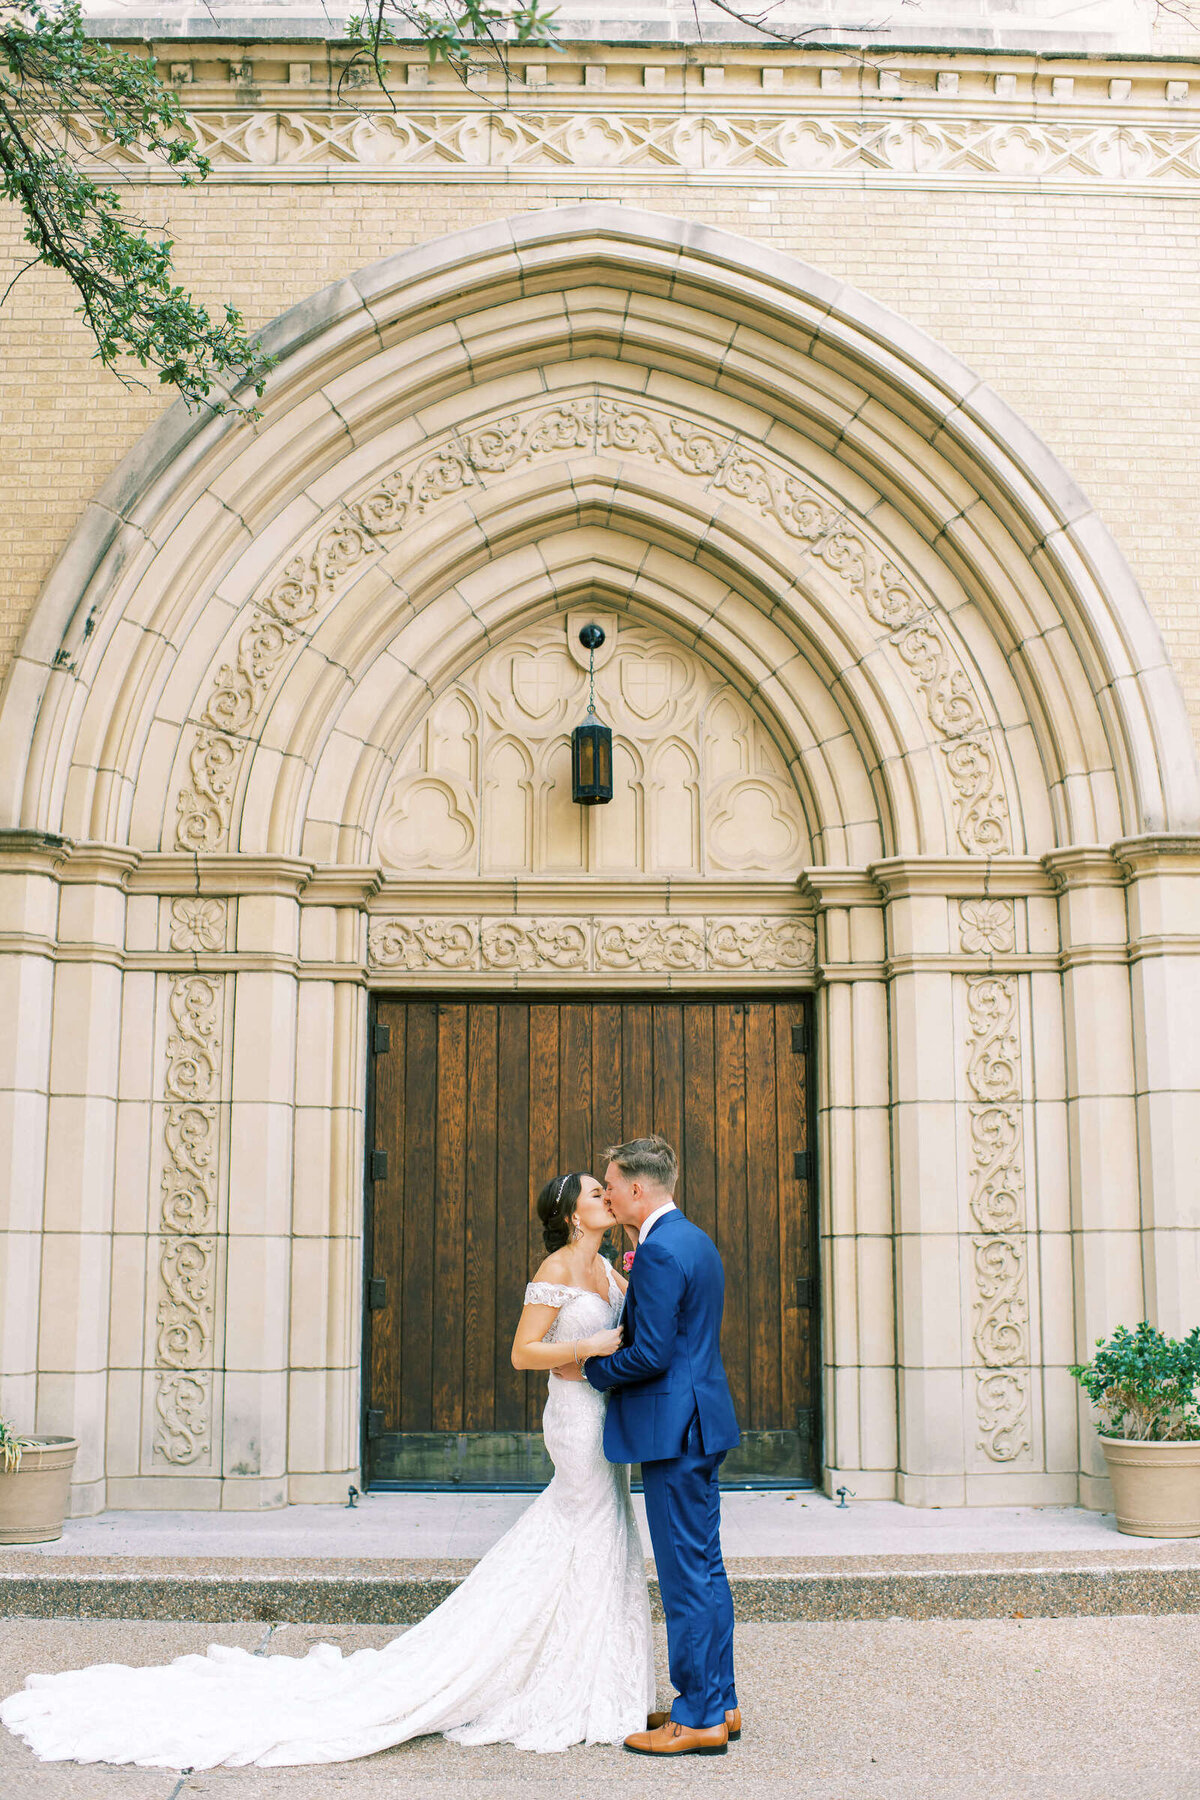 First look with bride and groom in front of ornate wedding chapel in Fort Worth